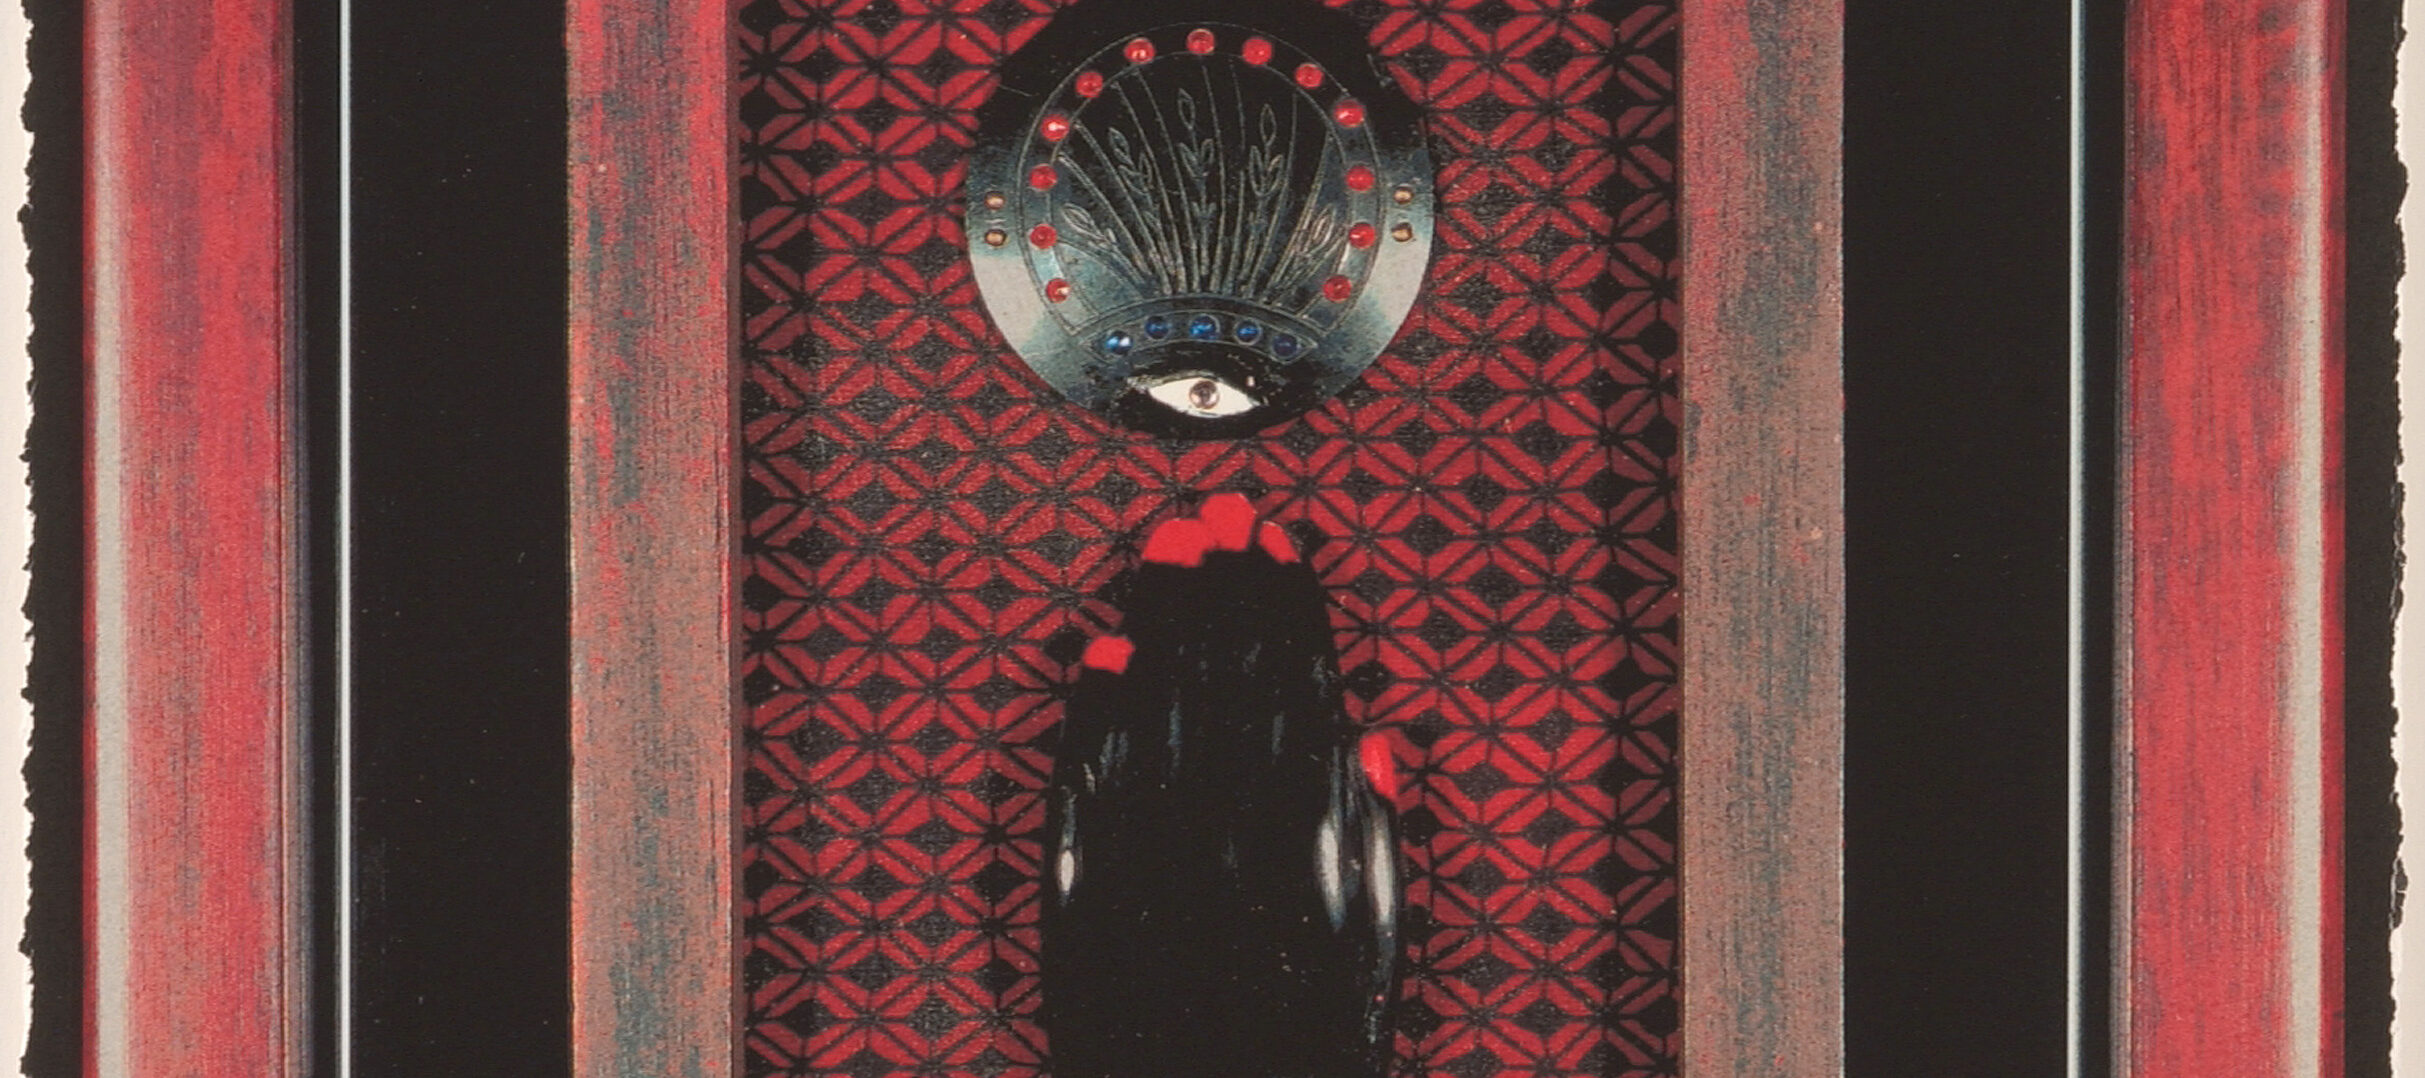 A black left hand with bright red nails and a red bracelet in a red wooden frame. It sits atop a black and red patterned background, fingers pointing toward a black medallion with an eye and other details. The red frame is surrounded by black and sits within a larger red frame.